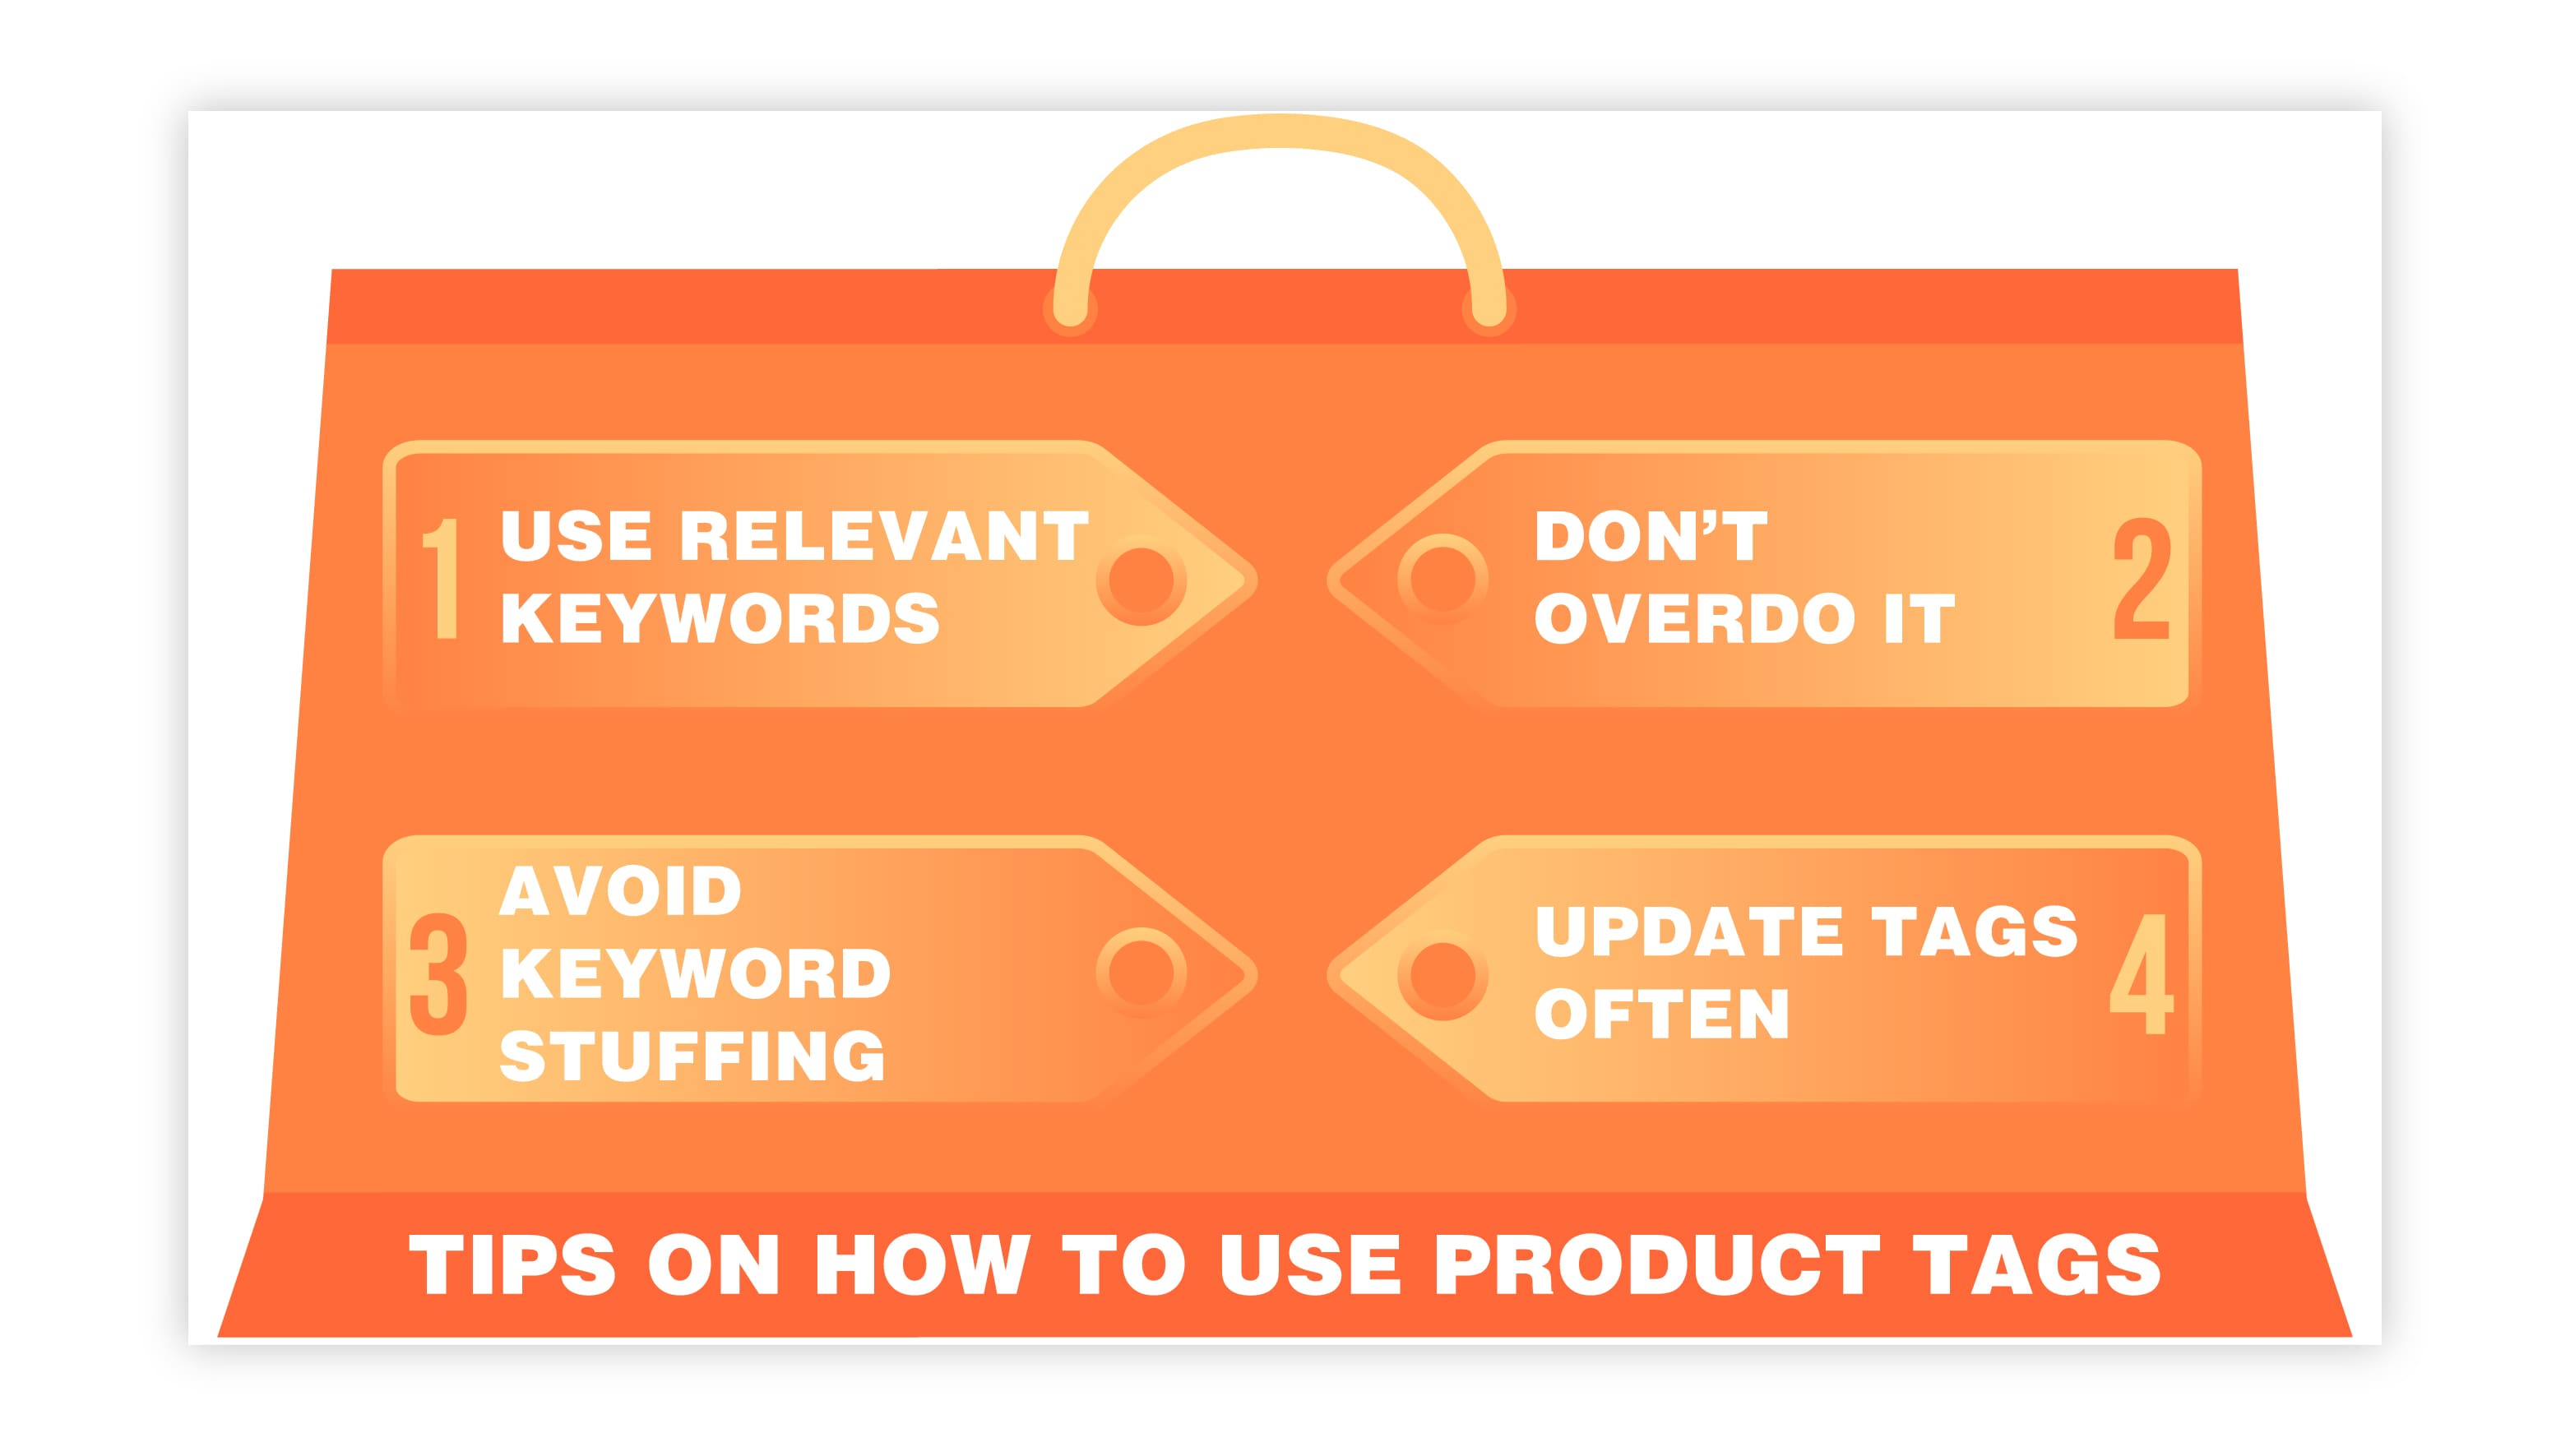 6 - TIPS ON HOW TO USE PRODUCT TAGS